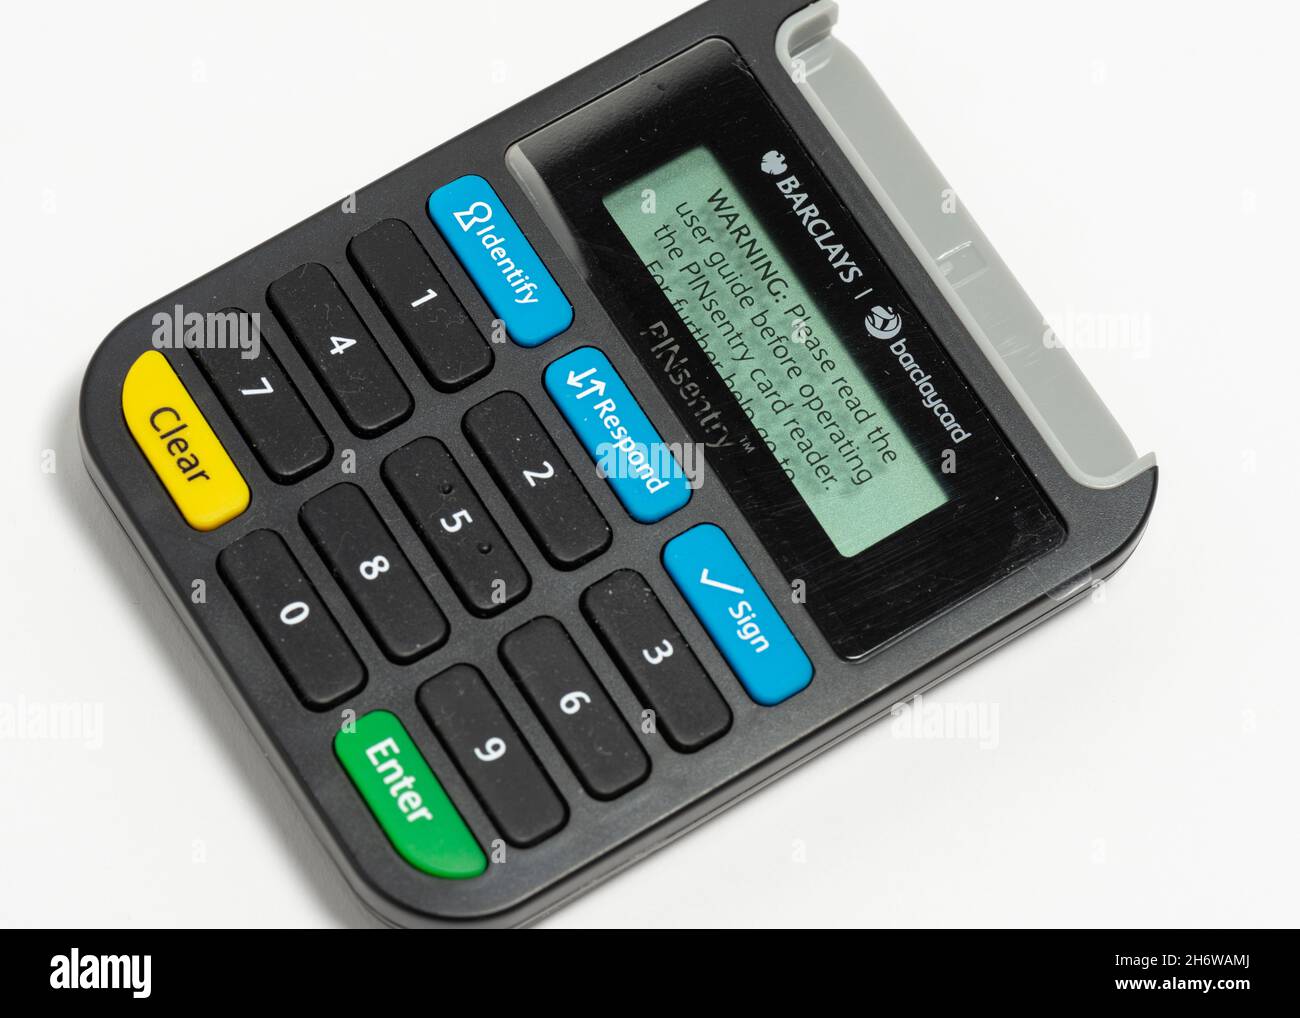 New Barclays Pinsentry card reader device on white Stock Photo